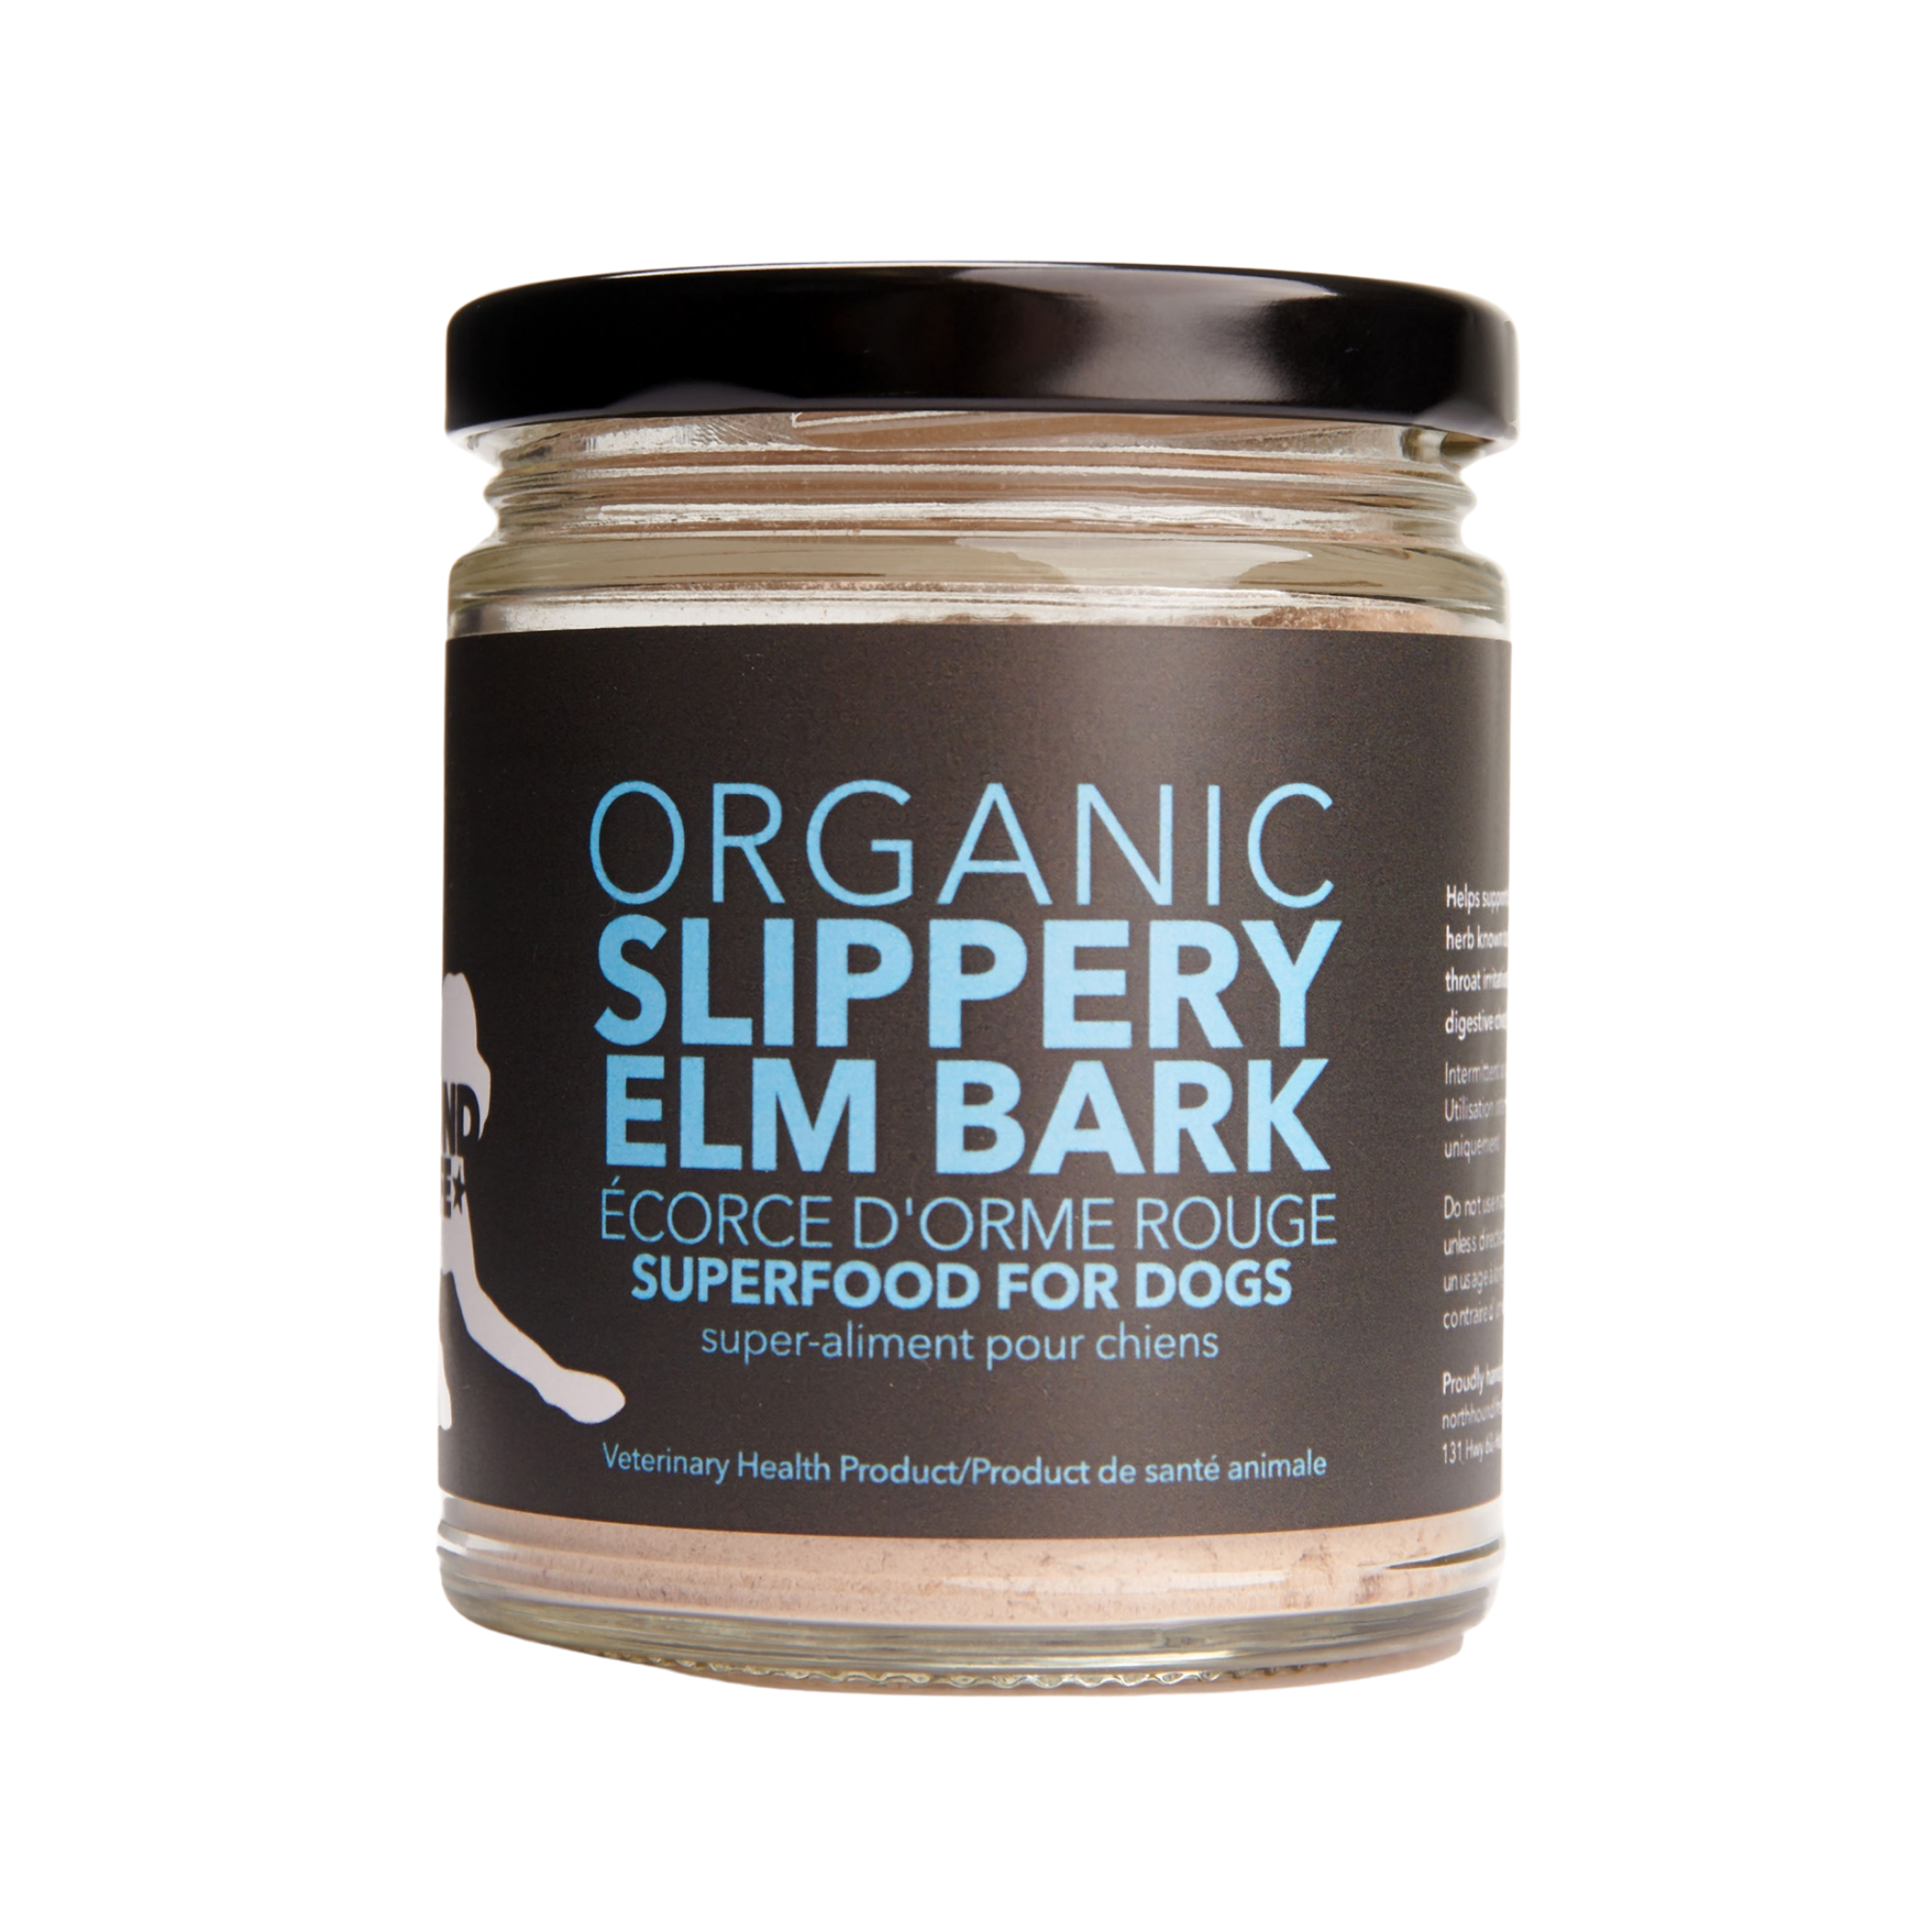 North Hound Life Organic Slippery Elm Bark Superfood for dogs - Mutts & Co.